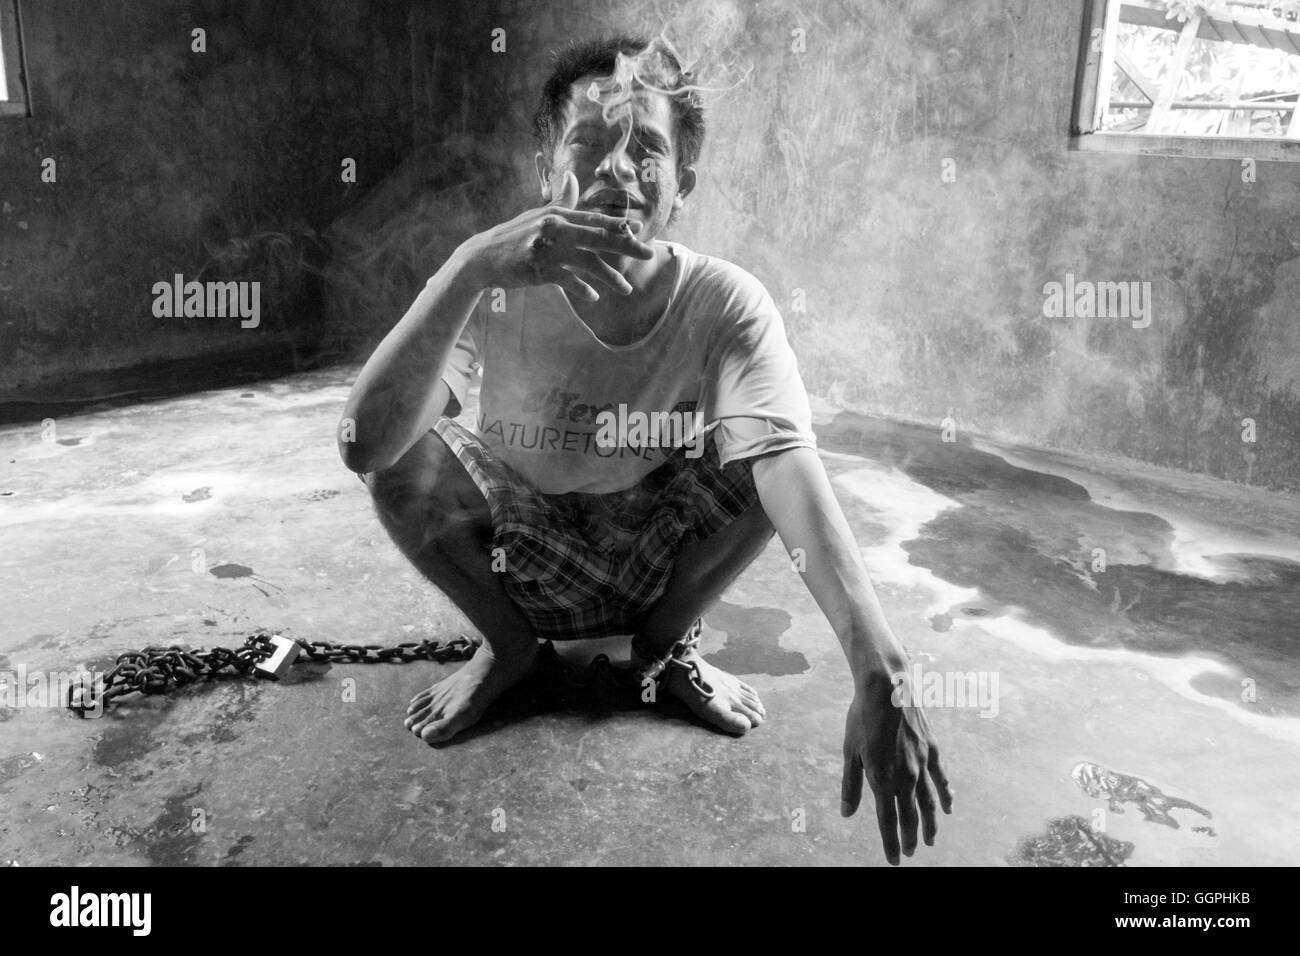 Yohanes Angsel, 33, suffers from mental illness and been chained to the floor of a room in his parents house since 2004. According to Human Rights Watch there are at least 18,800 people currently being shackled in Indonesia due to mental illness. Family members say relatives are shackled or chained up to prevent them from doing harm to themselves. Also, it's often the case that people in rural areas don’t have the facilities or know how to care for the mentally ill. Stock Photo